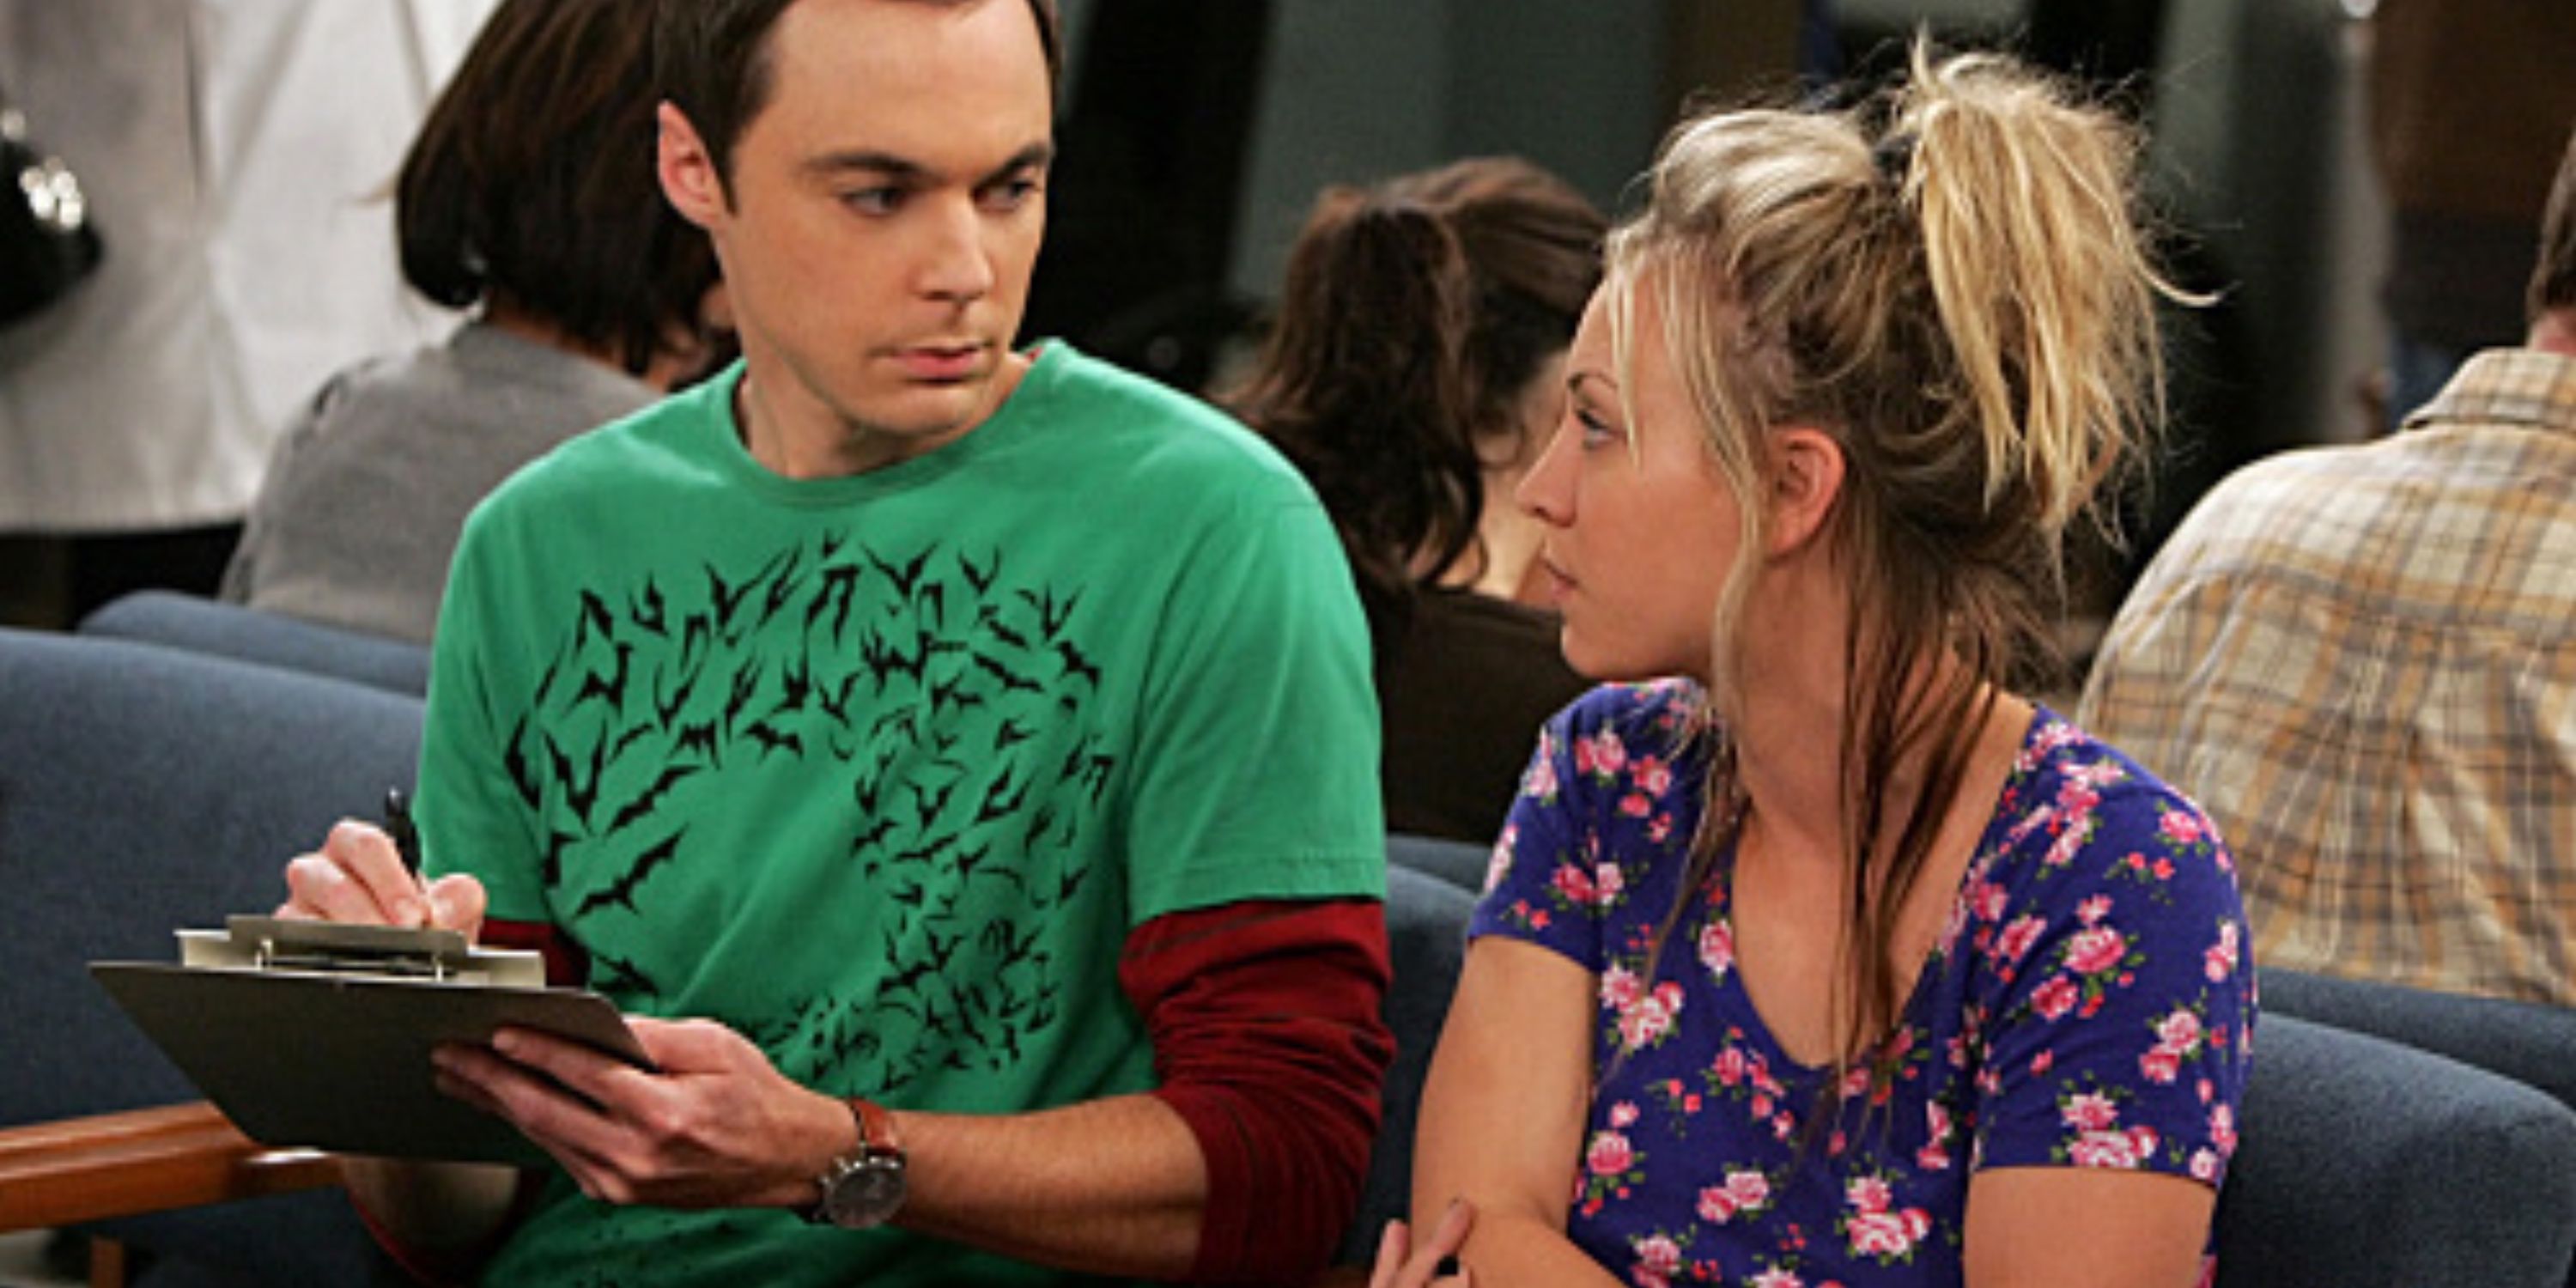 The Adhesive Duck Deficiency, Sheldon helps Penny in her time of need